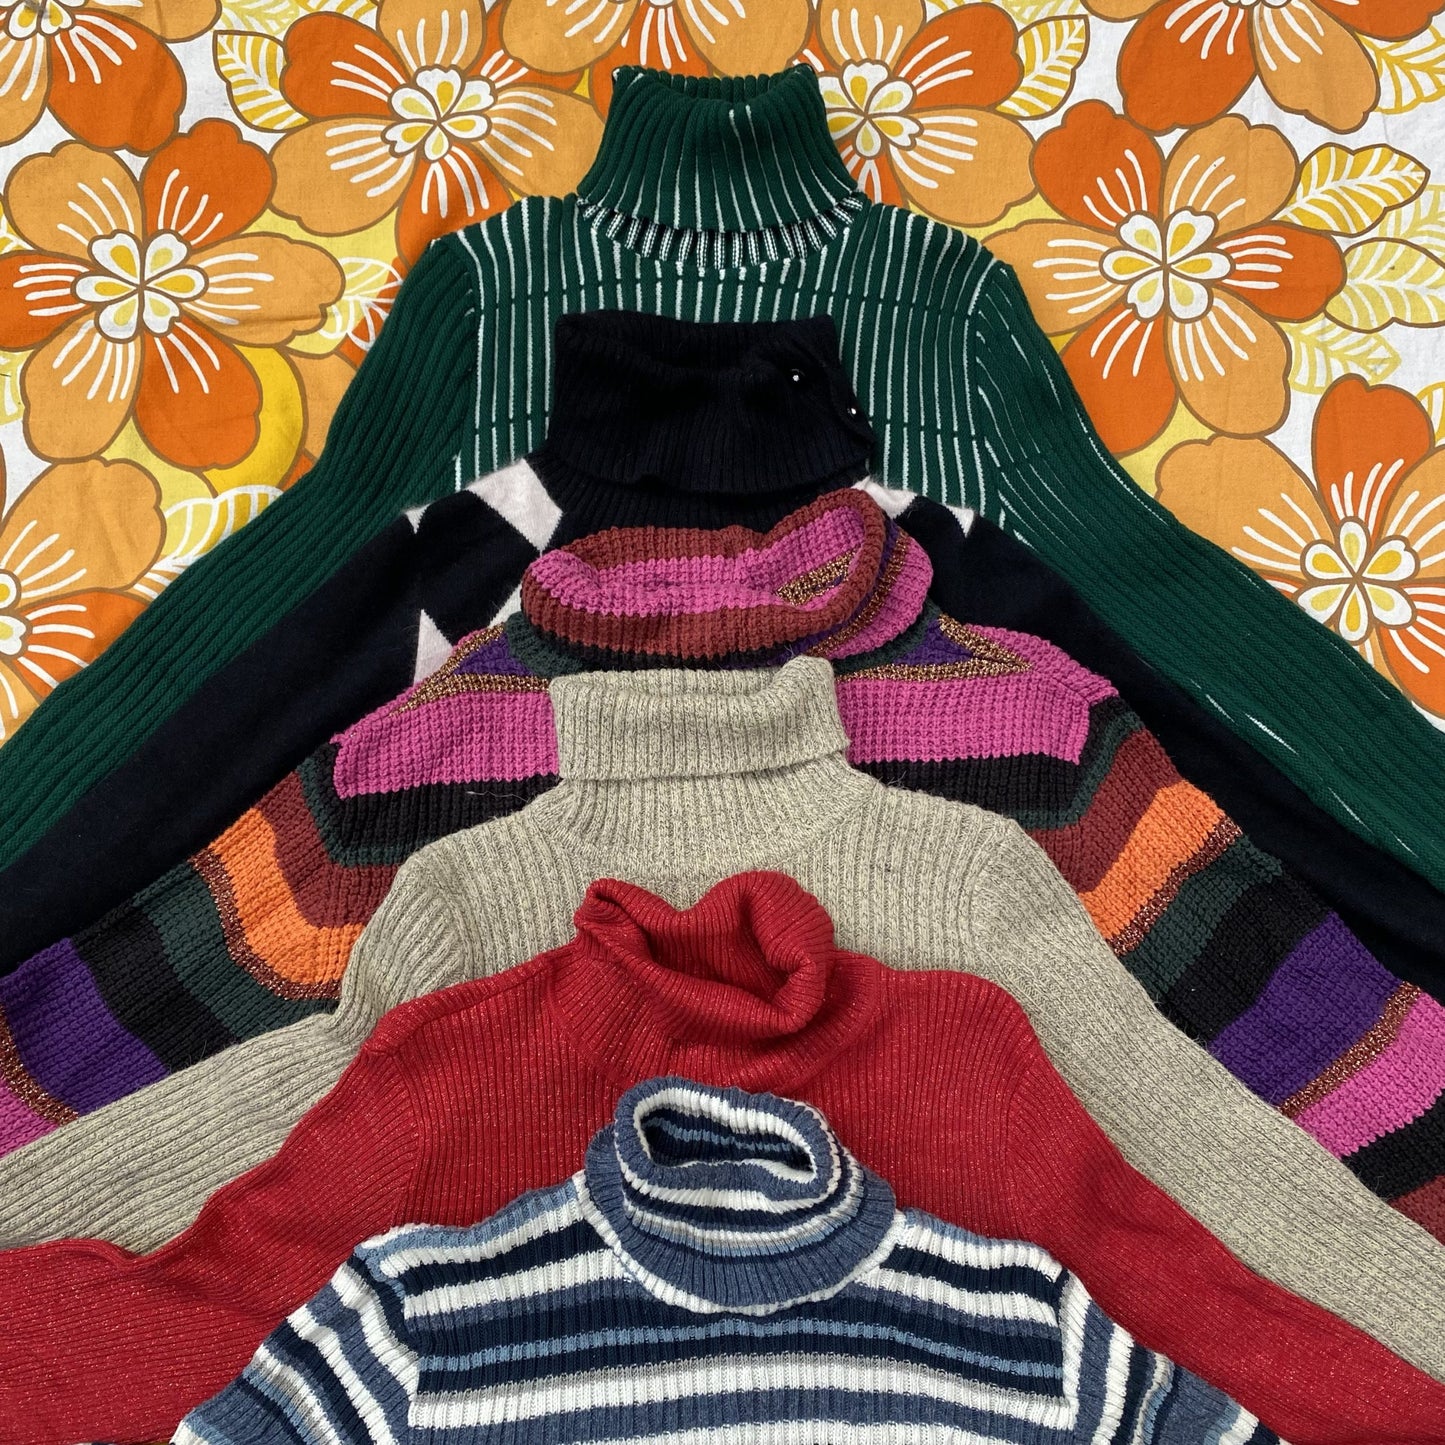 Wholesale vintage and secondhand mixed bundles of knitwear. Choose from Grade A, B or ungraded to bulk buy per kilo, piece or bale. Handpick available in Sussex warehouse of Brighton's biggest vintage retailer or shop at monthly kilo sale events.